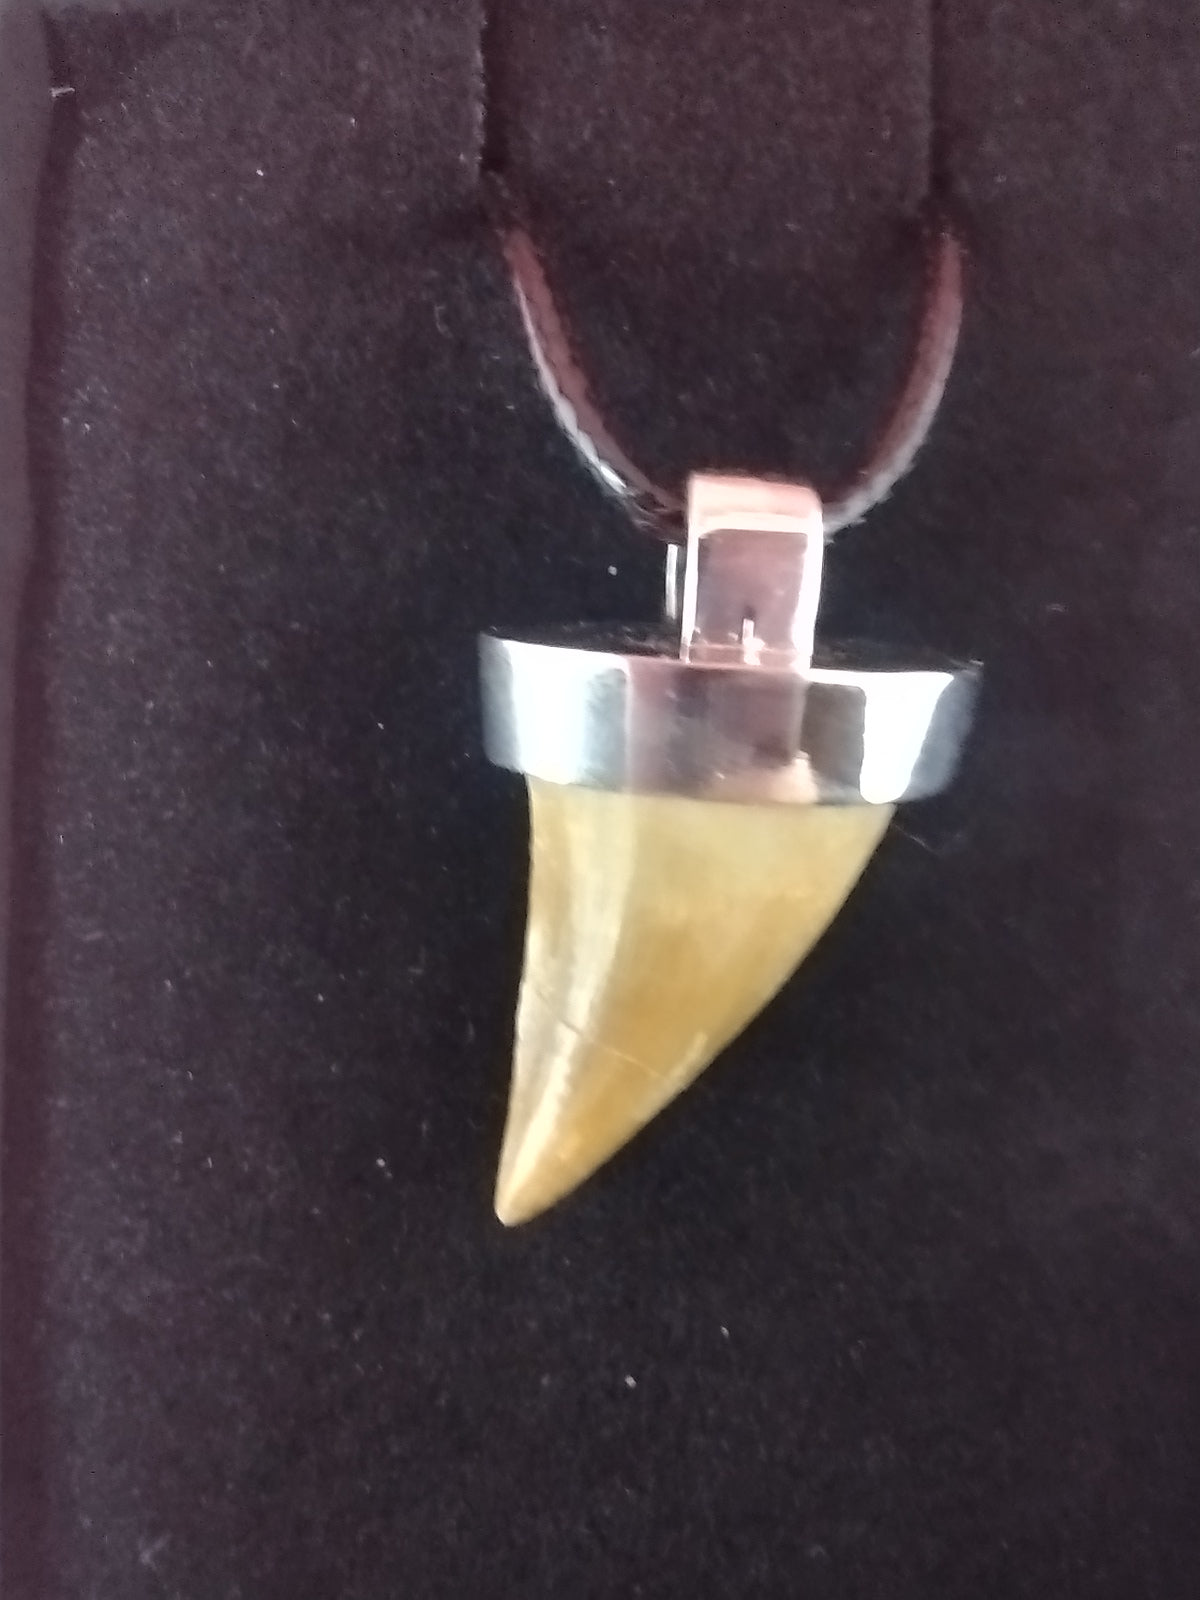 Drilled Gator Tooth Necklace | Natural Selections International